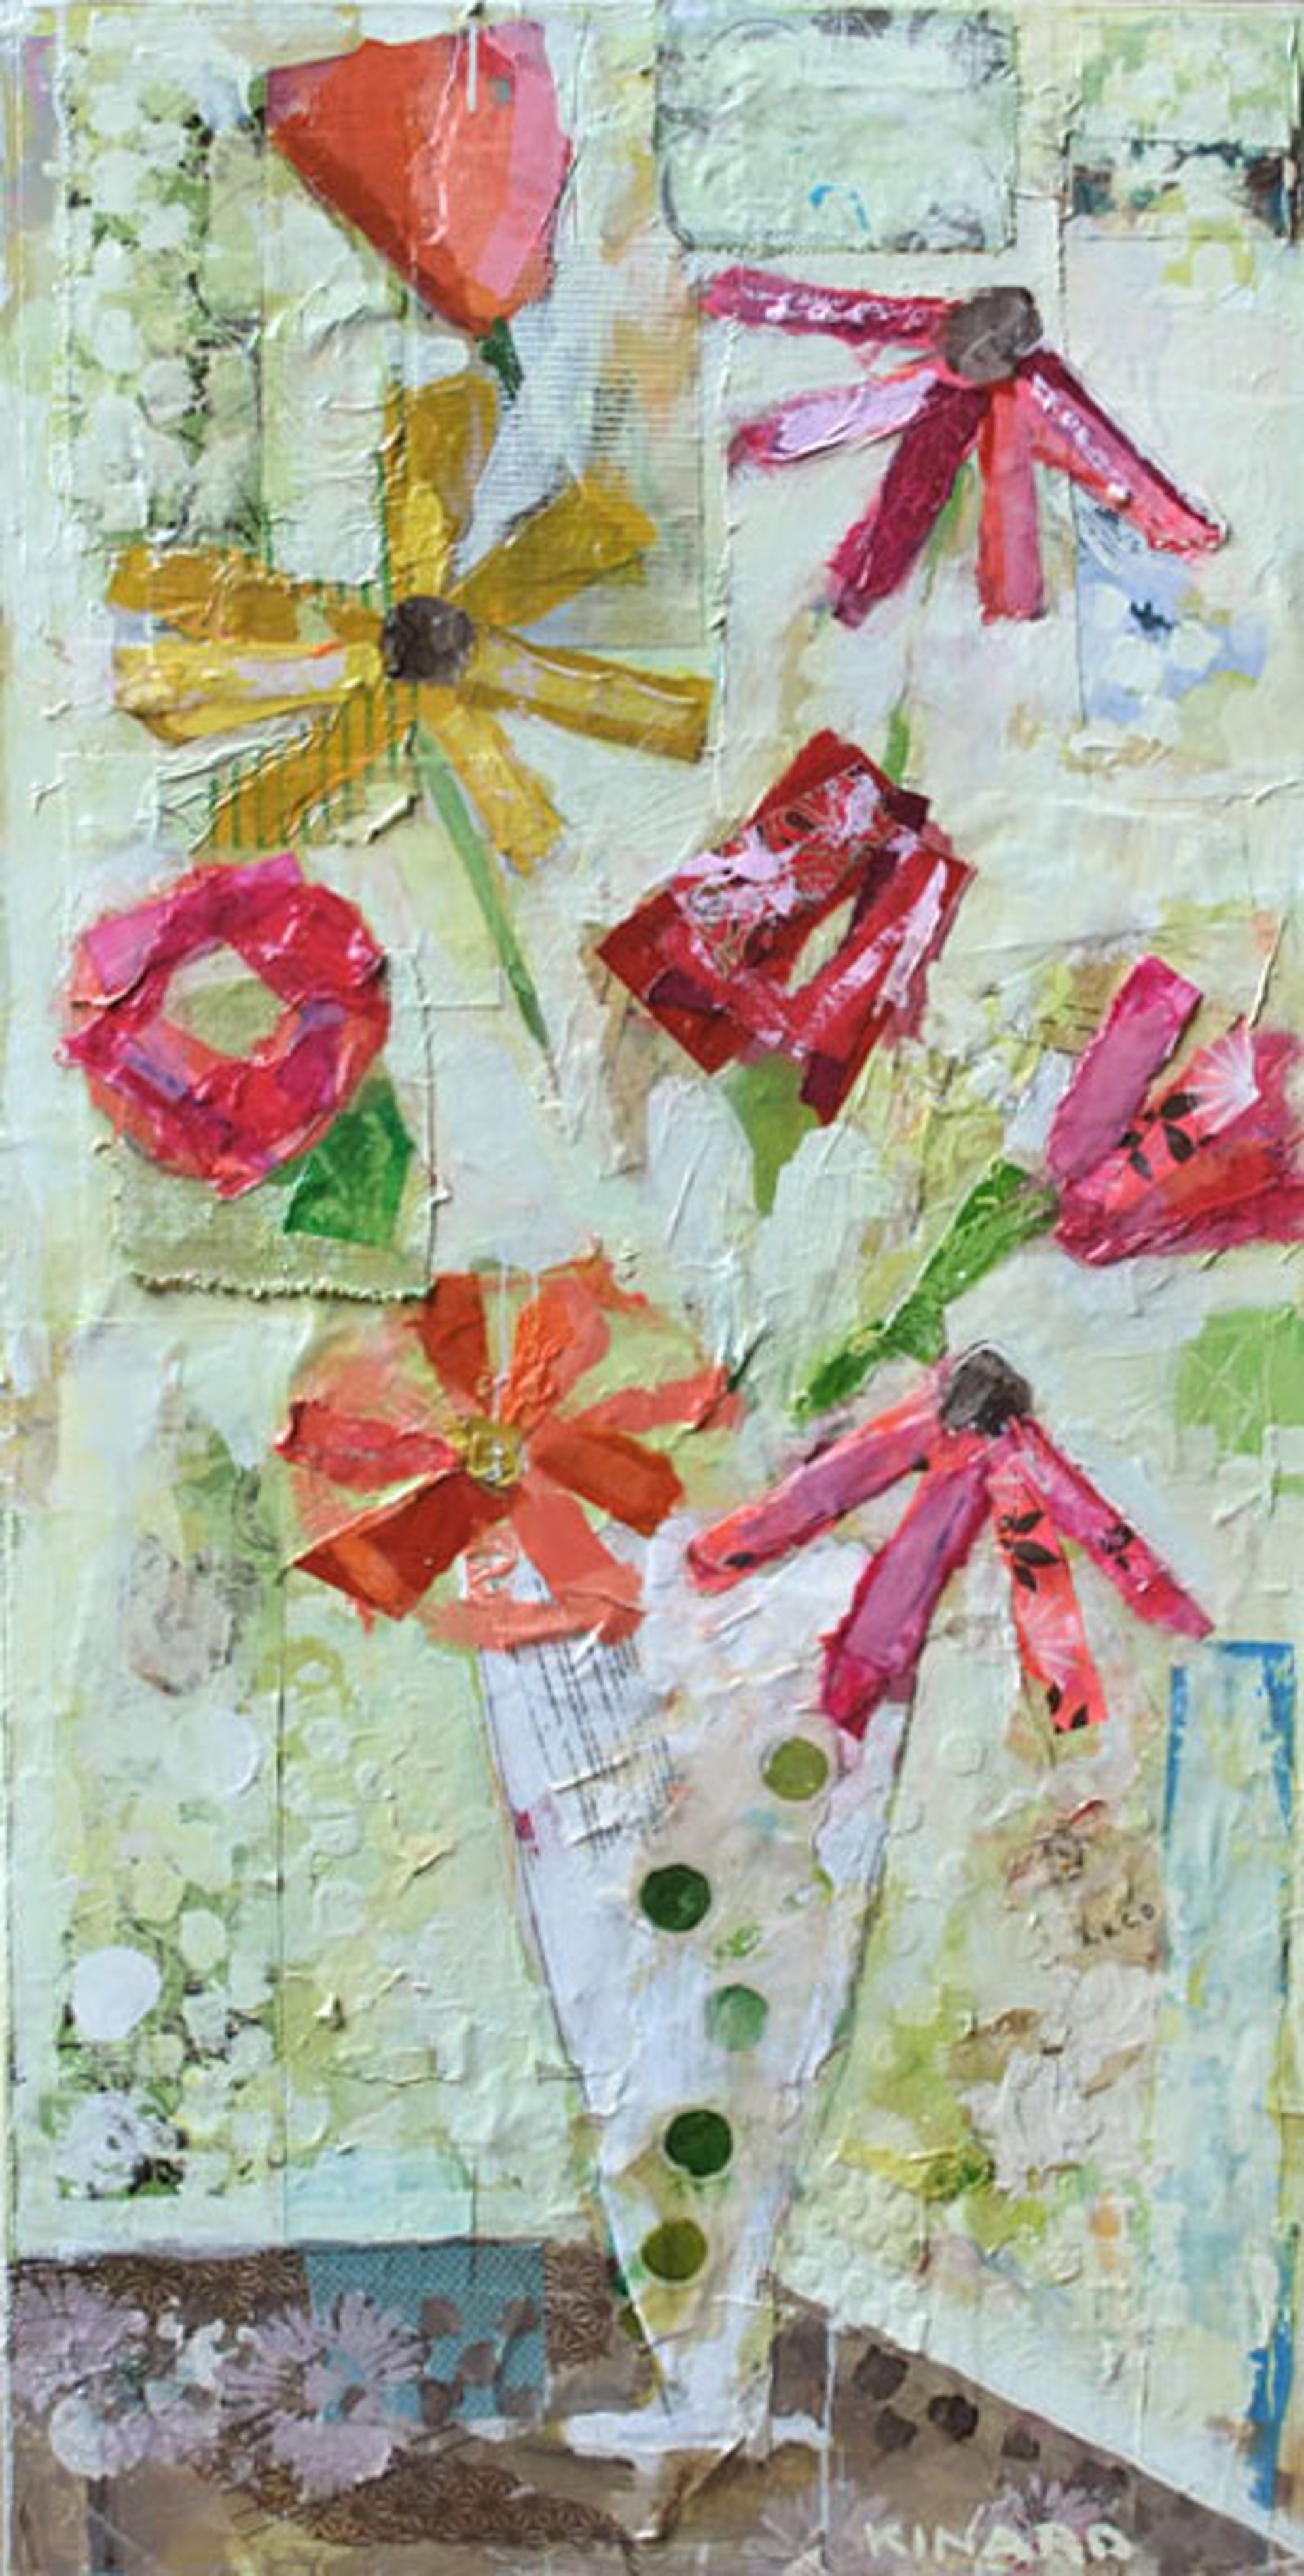 Charlie Blooms II by Christy Kinard